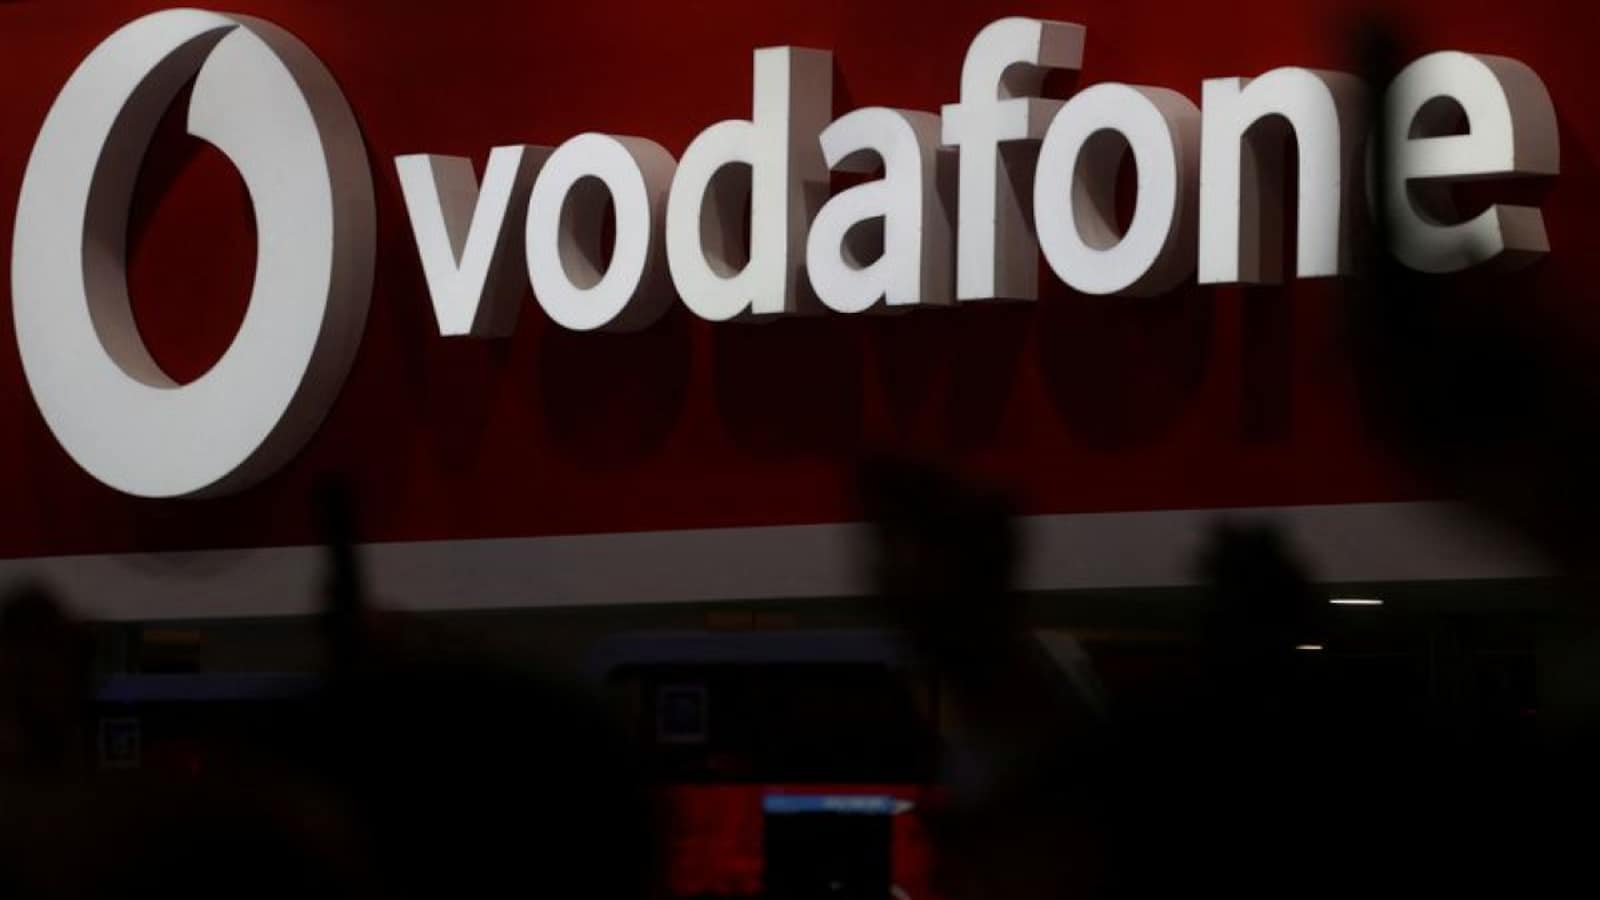 Govt to acquire Vodafone Idea stake after share price stabilises at Rs 10 or above